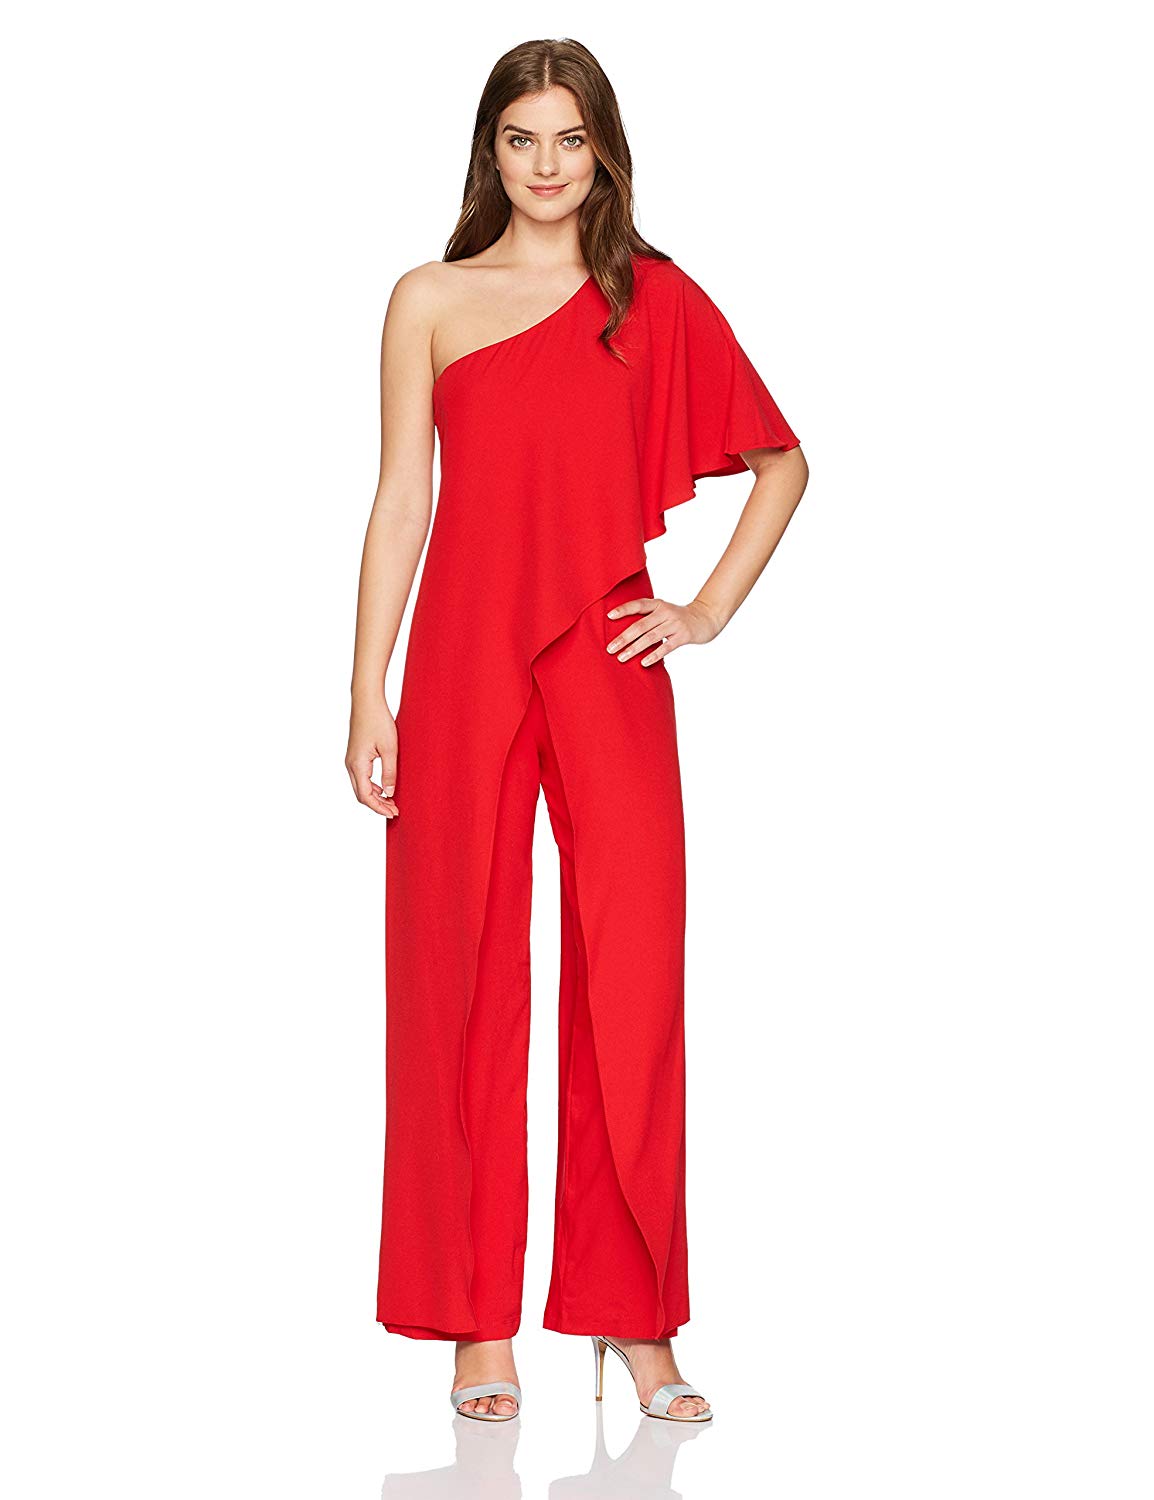 Marina Women's One Shoulder Jumpsuit with Cascade Ruffle, Red, Size 8.0 ...